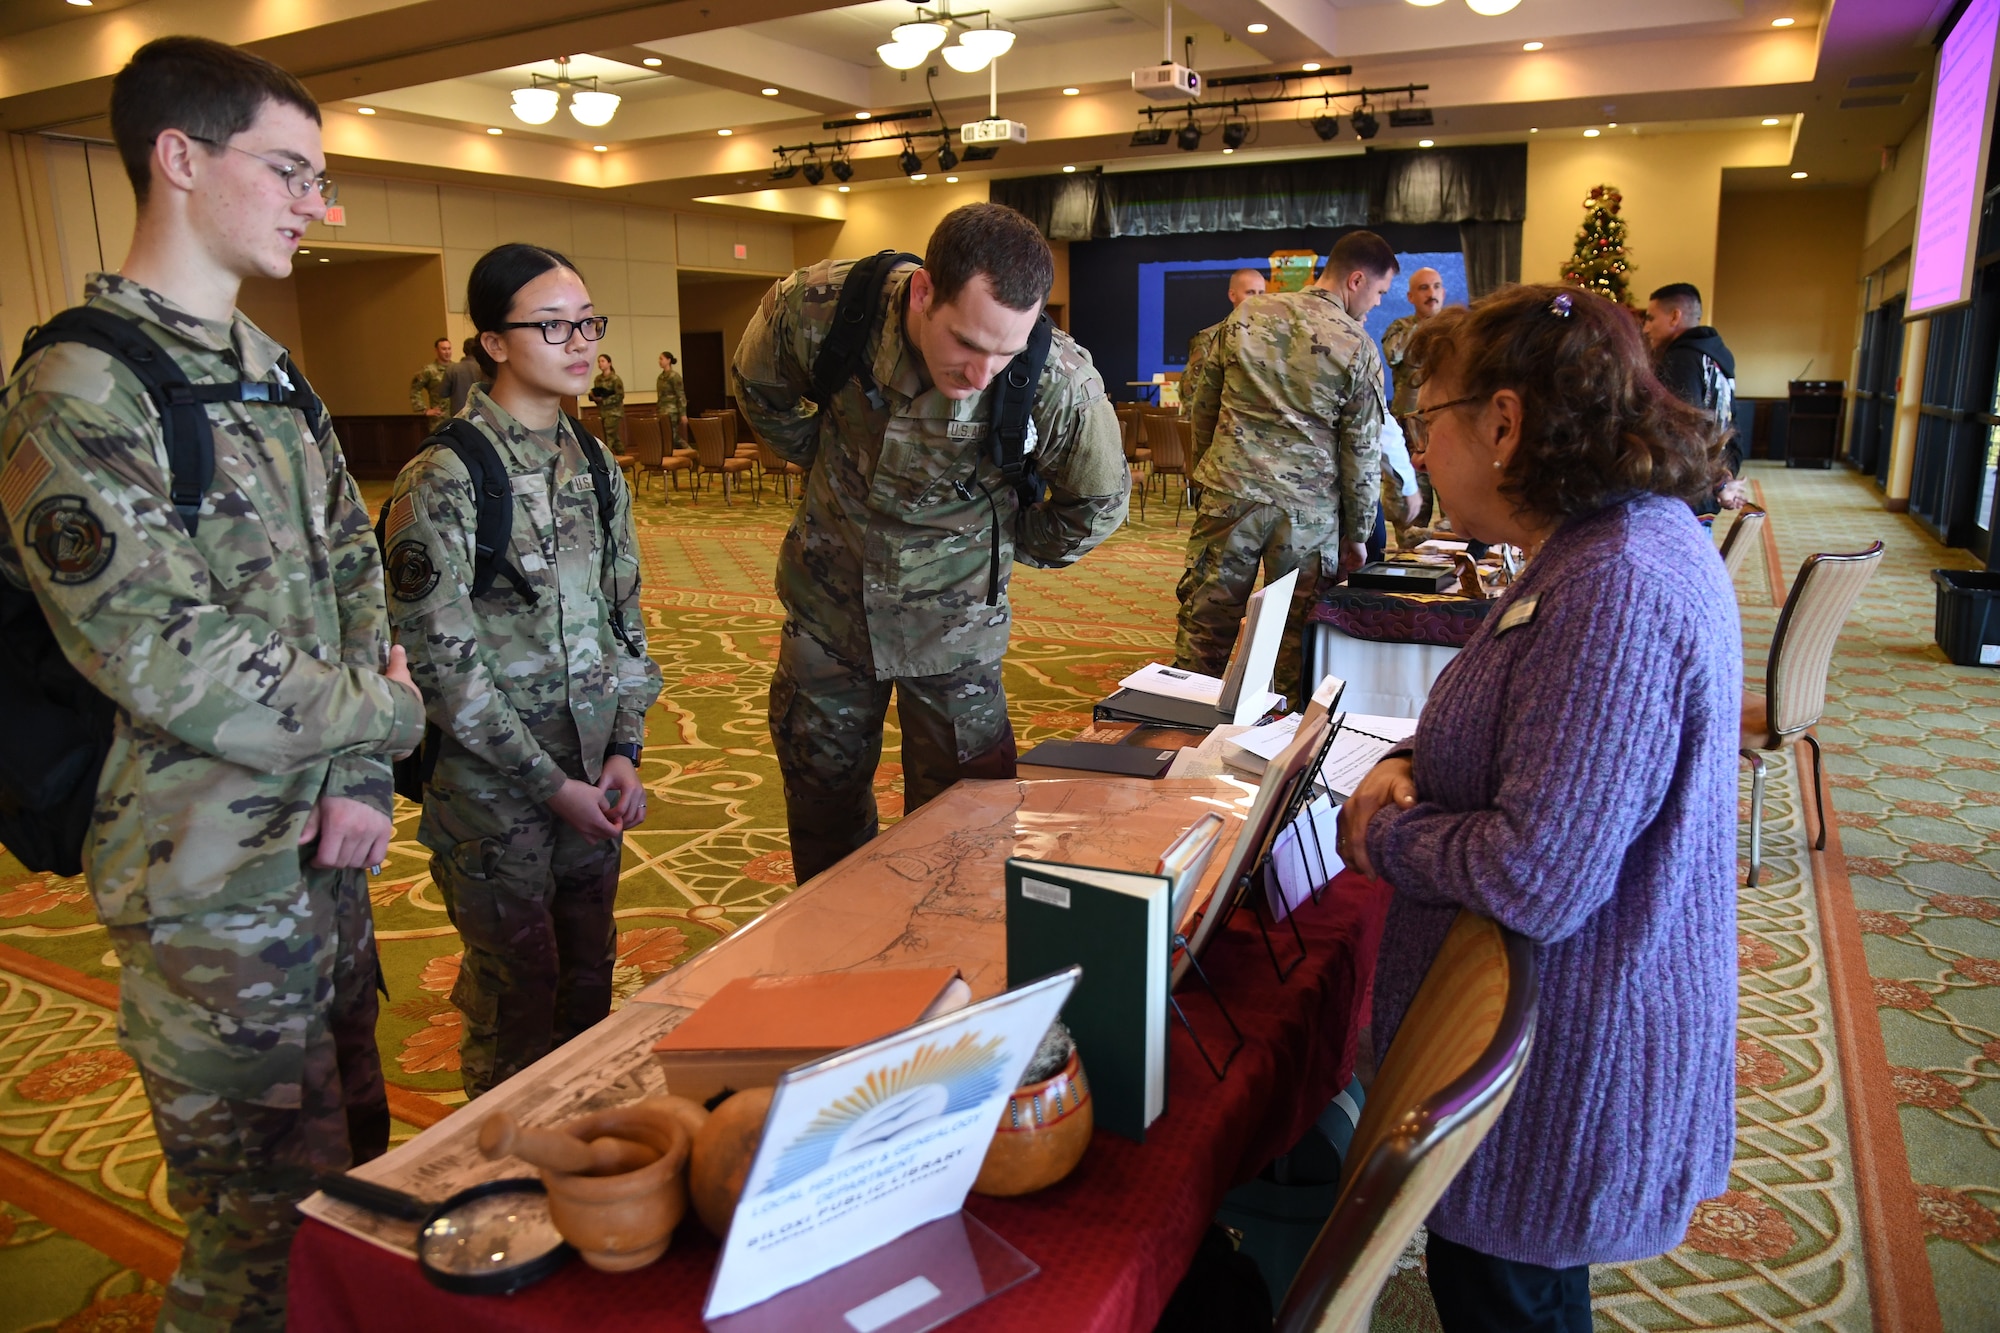 Keesler personnel view Native American artifacts and memorabilia on display following a panel discussion held in recognition of National Native American Heritage Month inside the Bay Breeze Event Center at Keesler Air Force Base, Mississippi, Nov. 30, 2021. National Native American Heritage Month is celebrated throughout November by paying tribute to the ancestry and traditions of Native Americans. (U.S. Air Force Photo by Kemberly Groue)